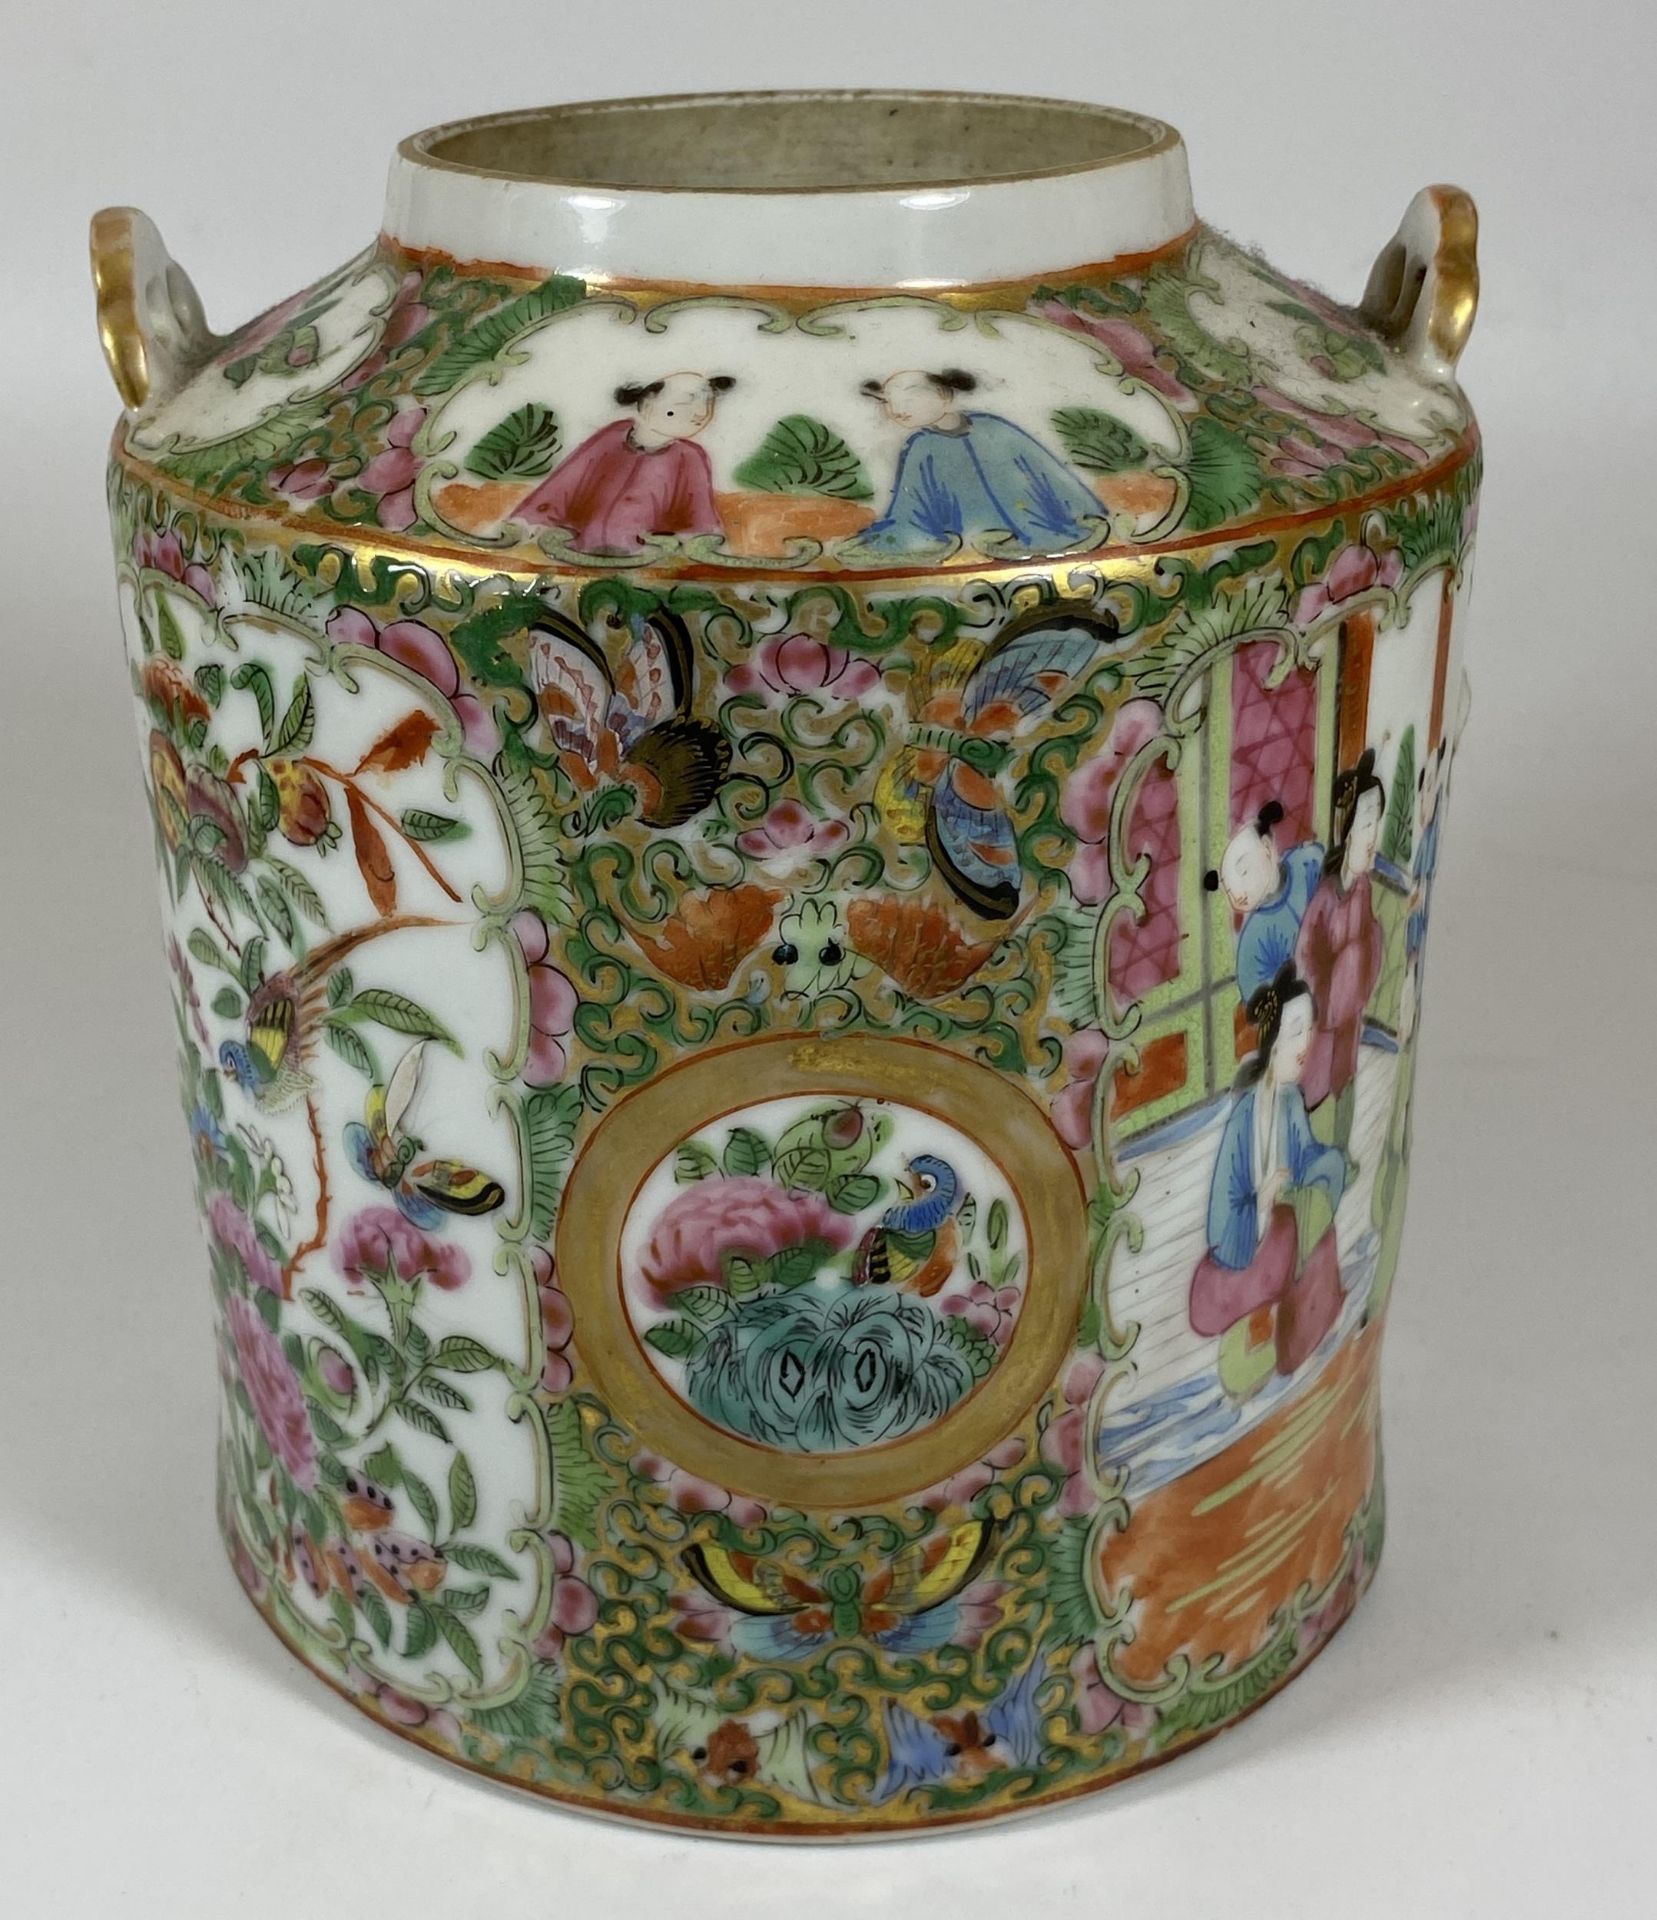 A 19TH CENTURY CHINESE CANTON FAMILLE ROSE MEDALLION TEAPOT (MISSING SPOUT), HEIGHT 16CM